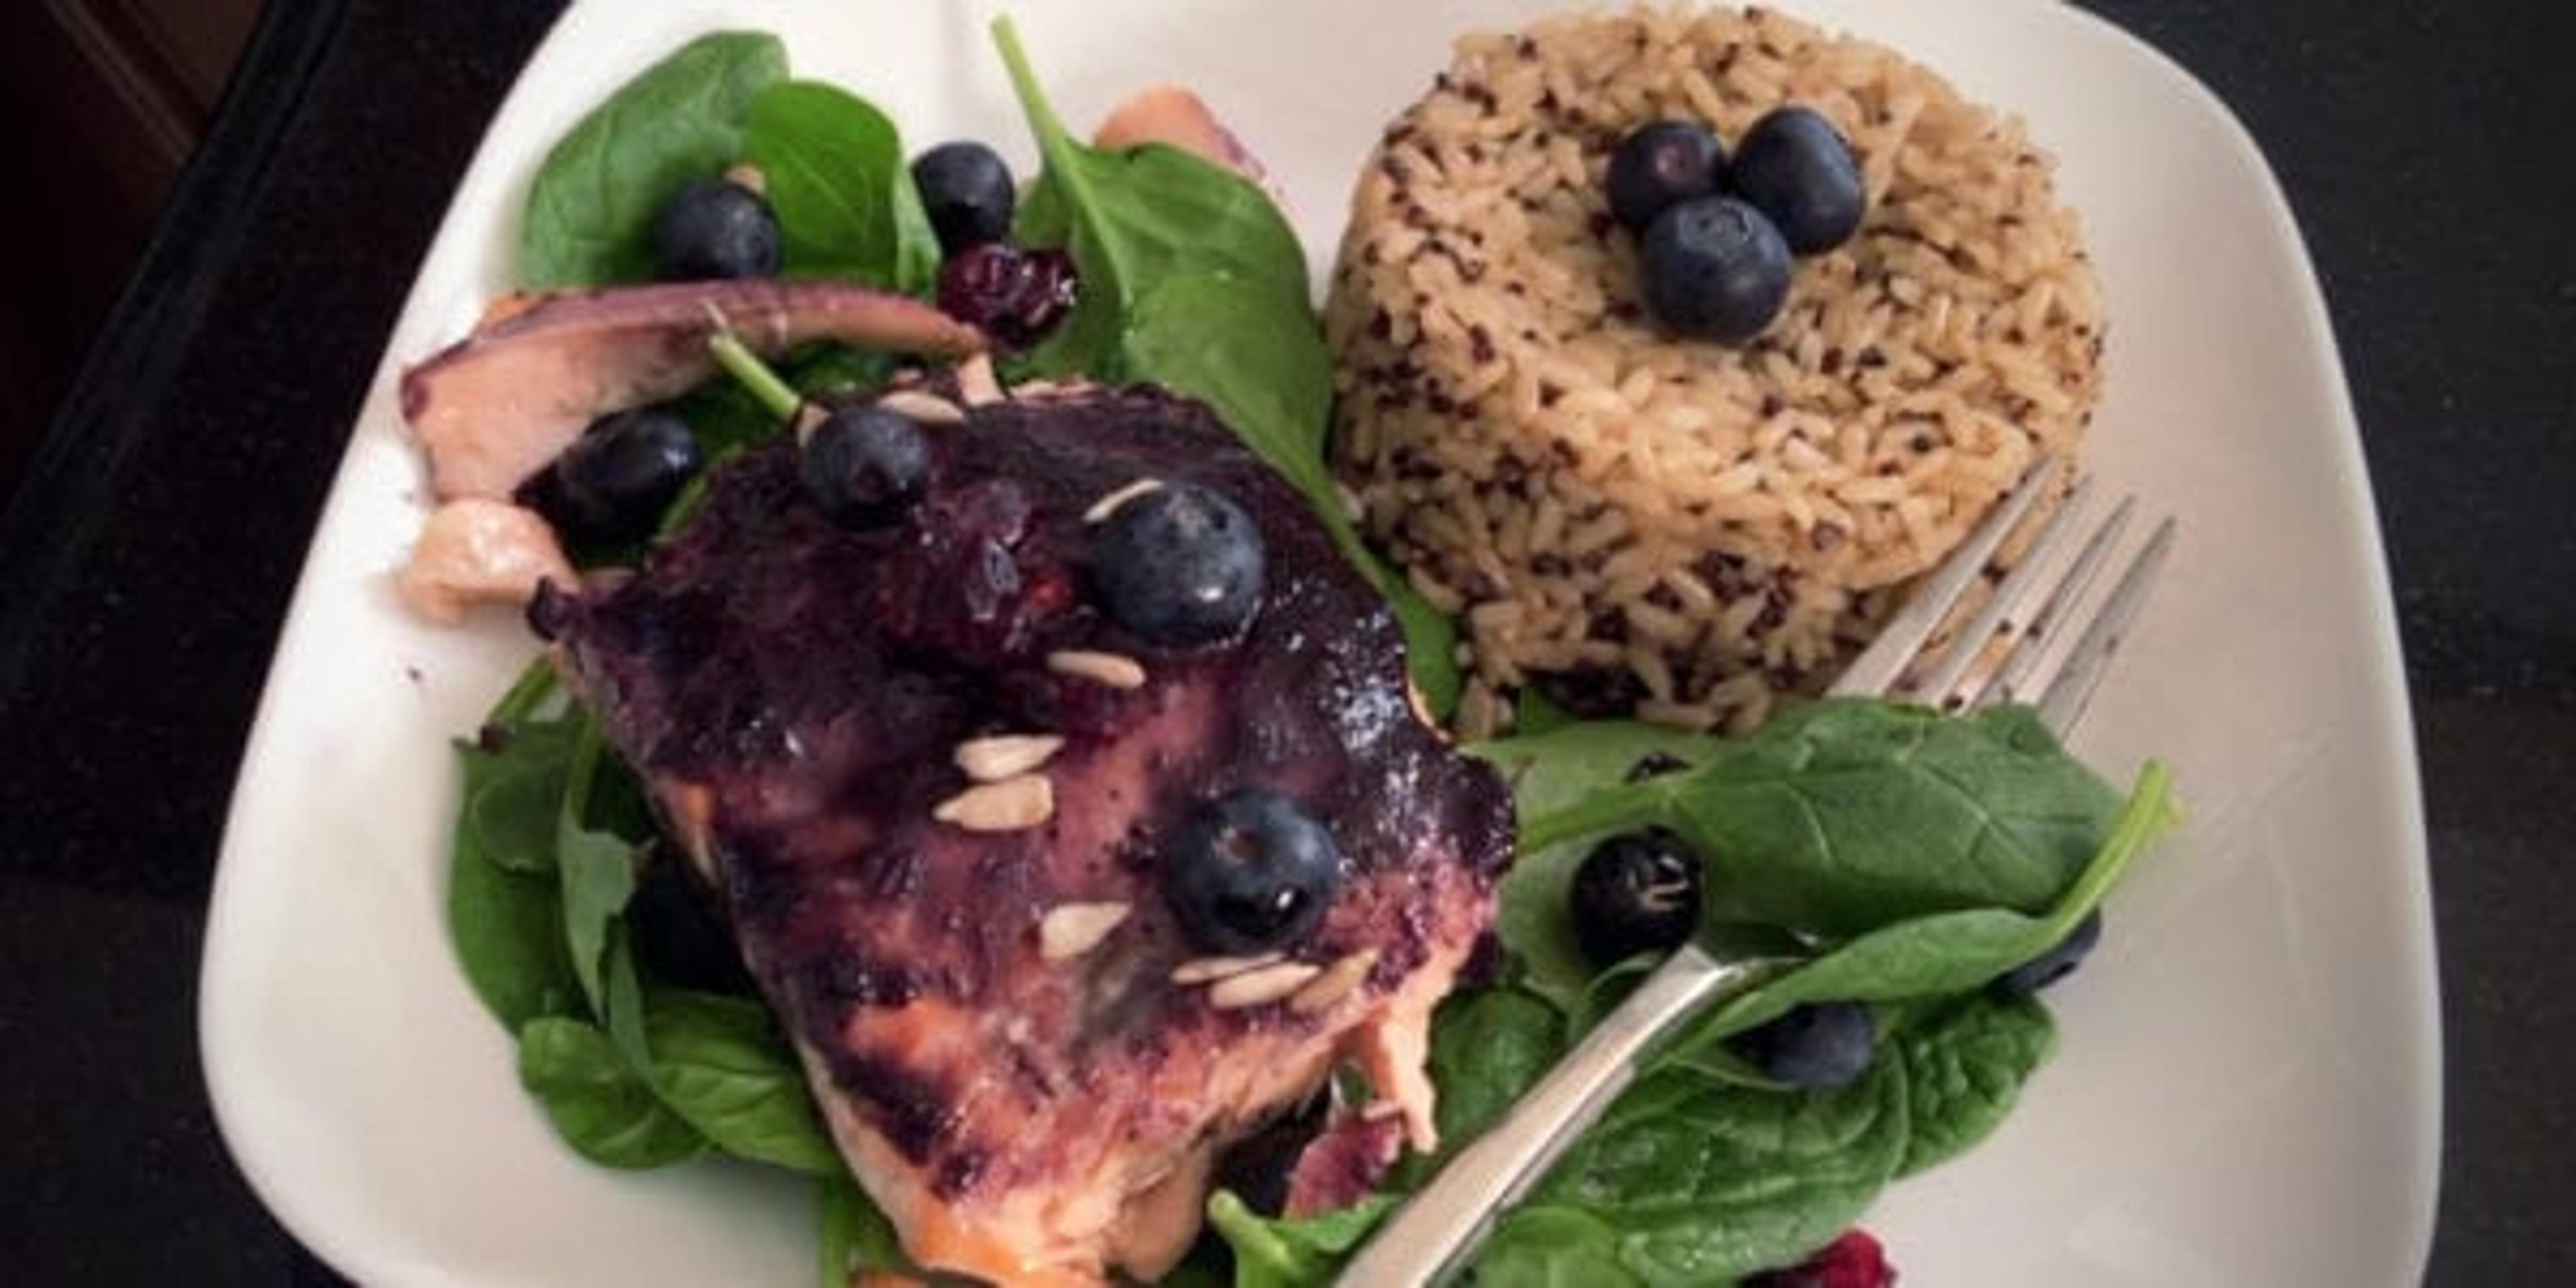 Salmon with blueberry glaze atop a bed of spinach and side of rice